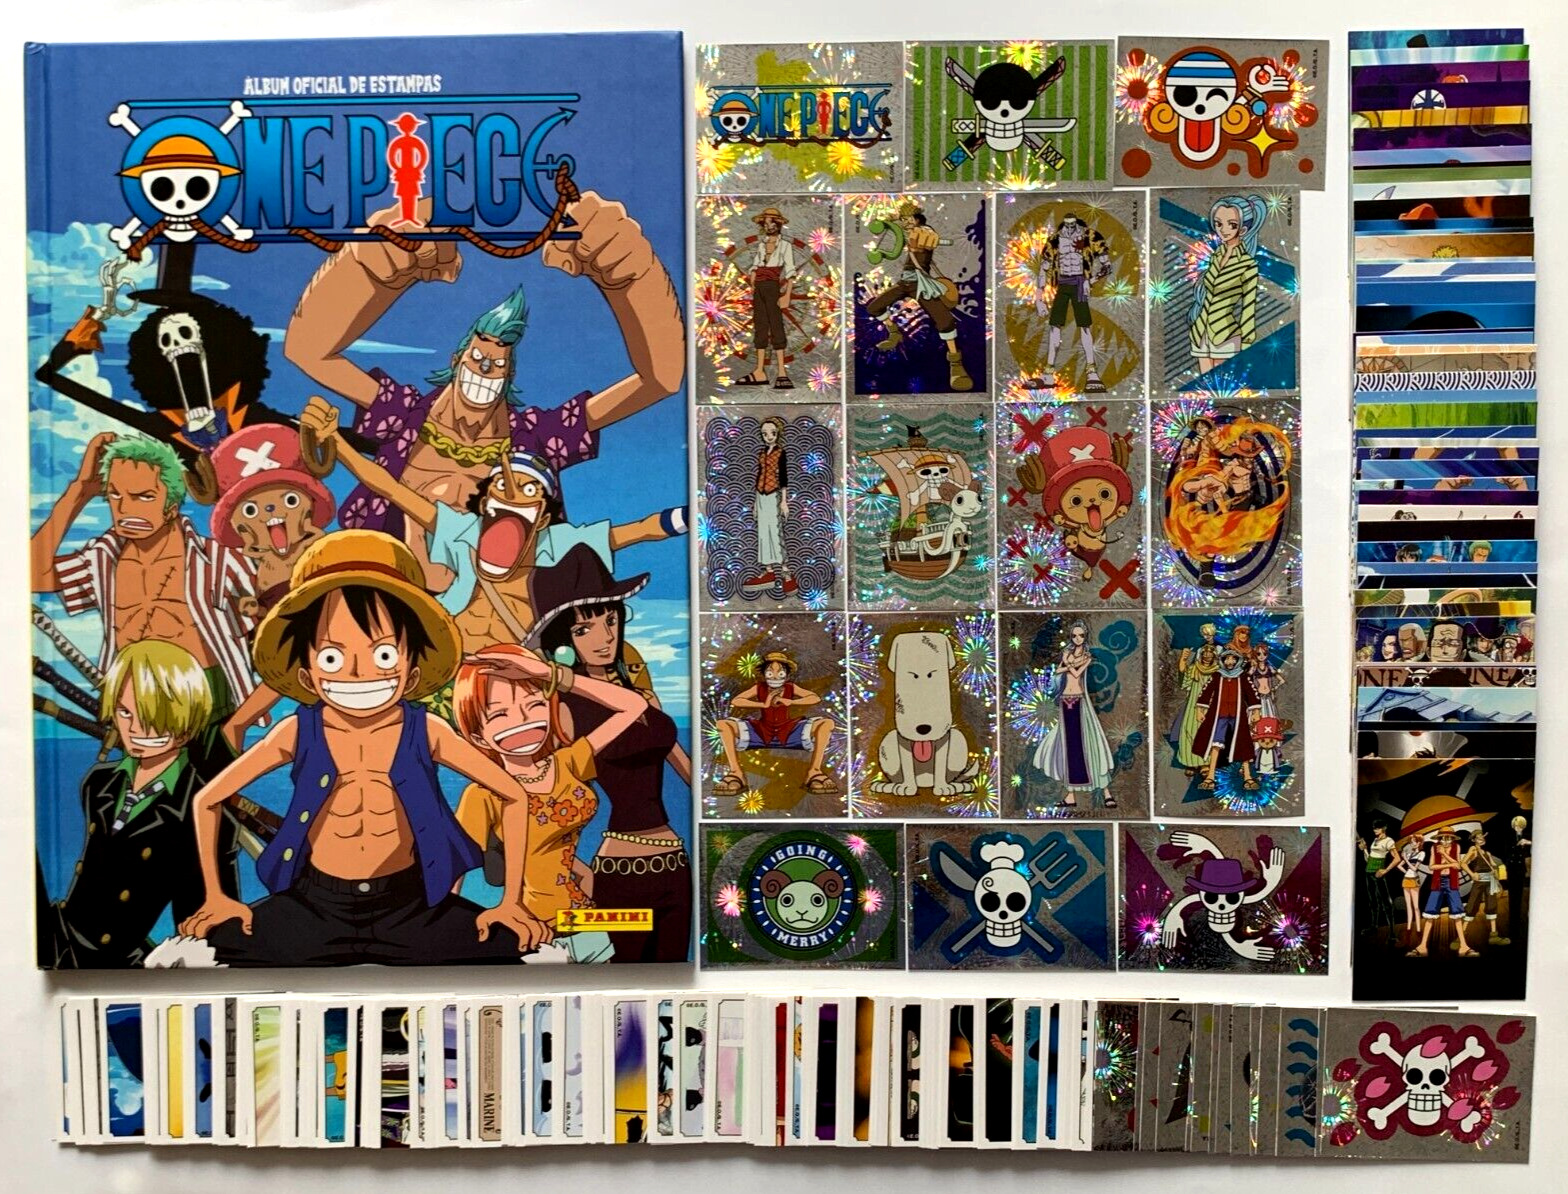 2020 ALBUM ONE PIECE Hard Cover + FULL SET 212/212 + CARDS 50/50 MEXICO Edition